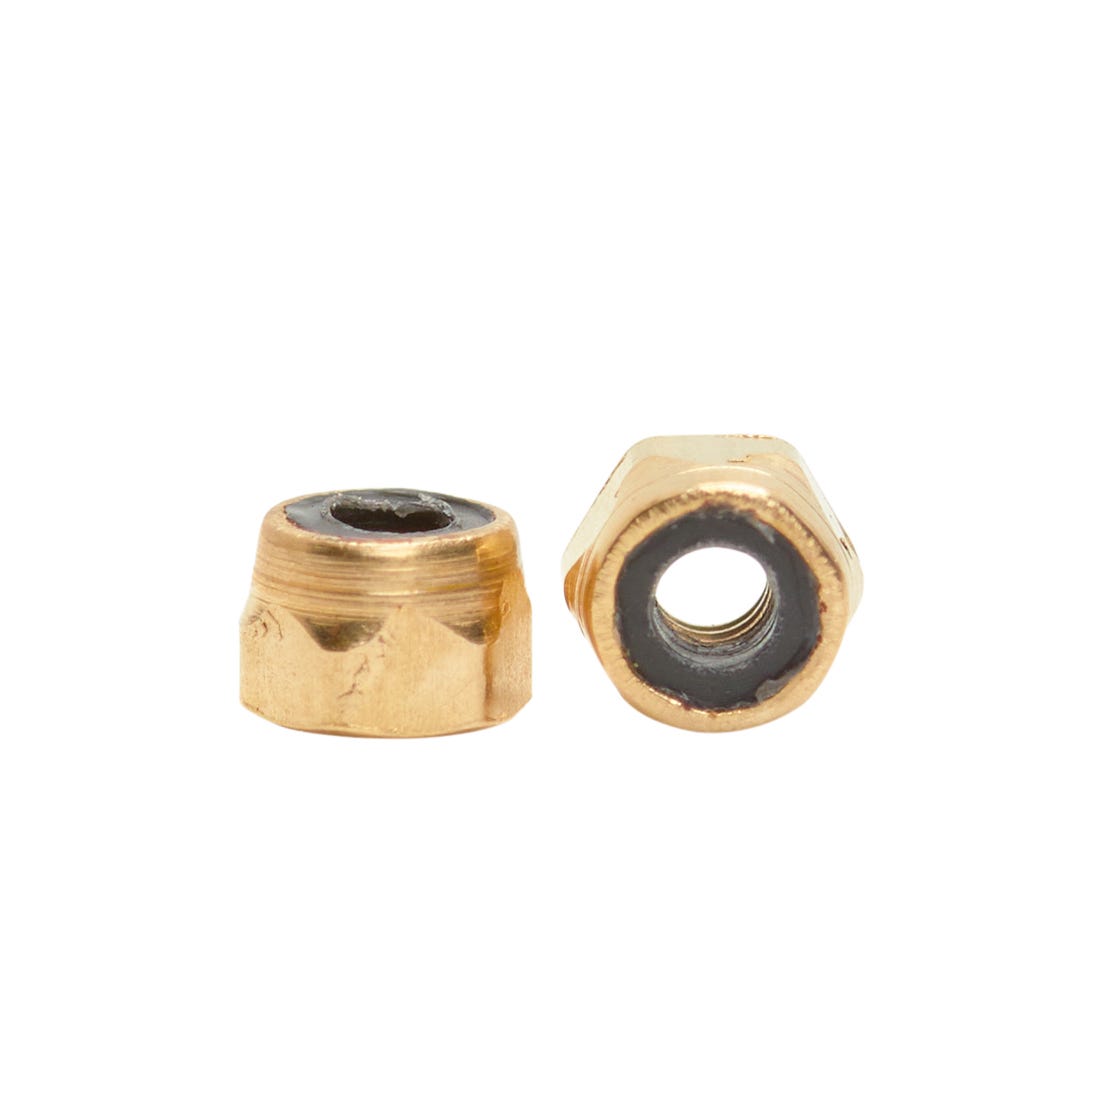 Blackriver First Aid Fingerboard Lock Nuts - 2 Pack